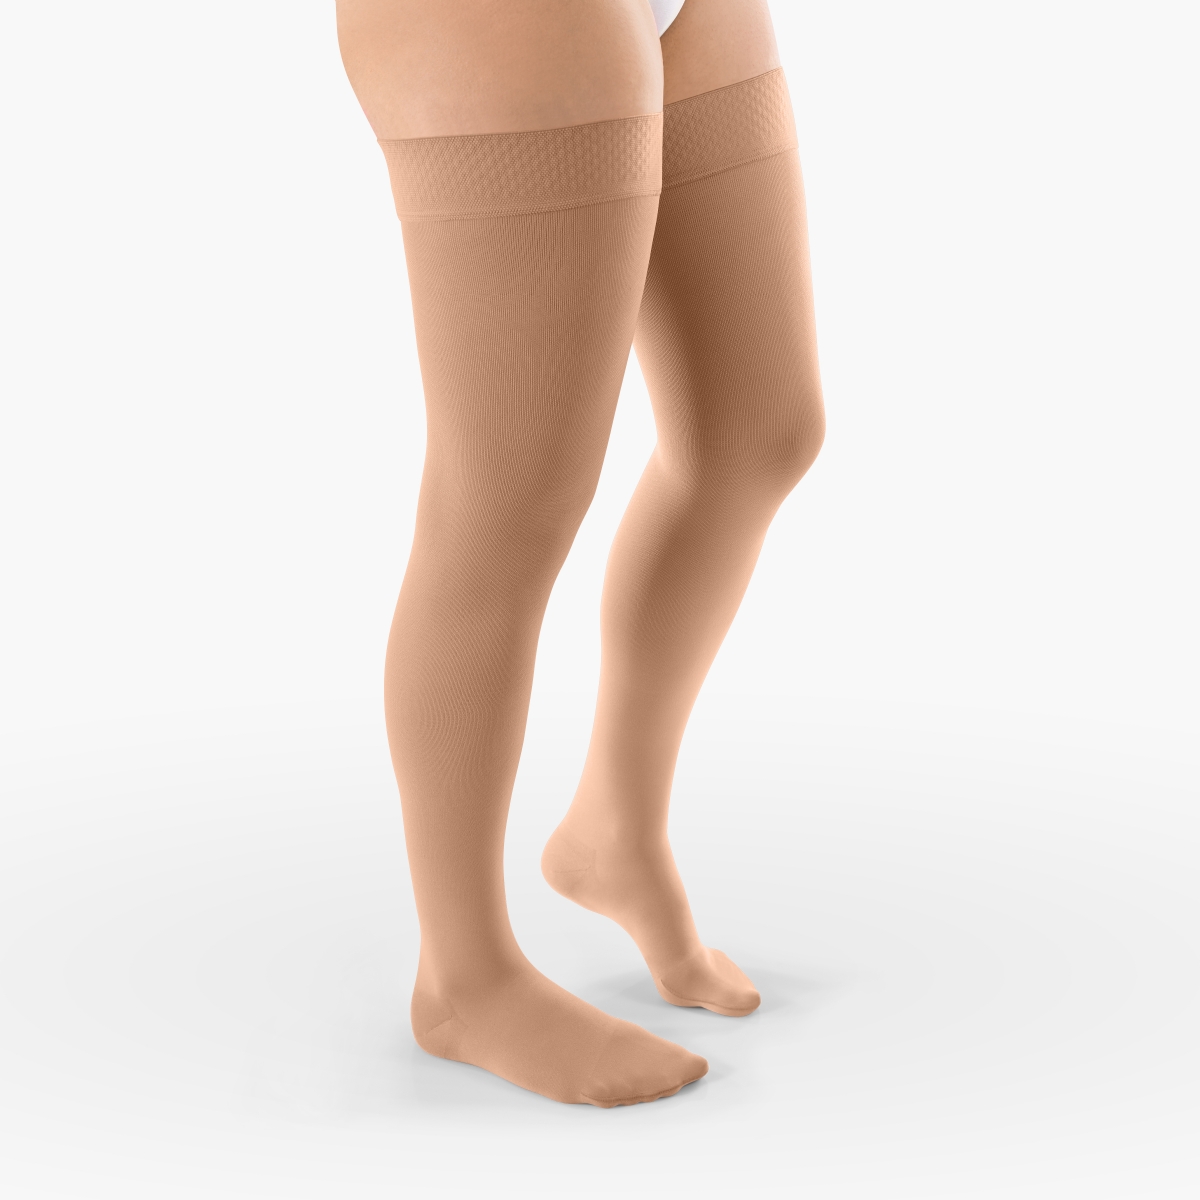 Venosan Elastic Stockings Class 1 Compression Knee without Toecap SweetCare  United States